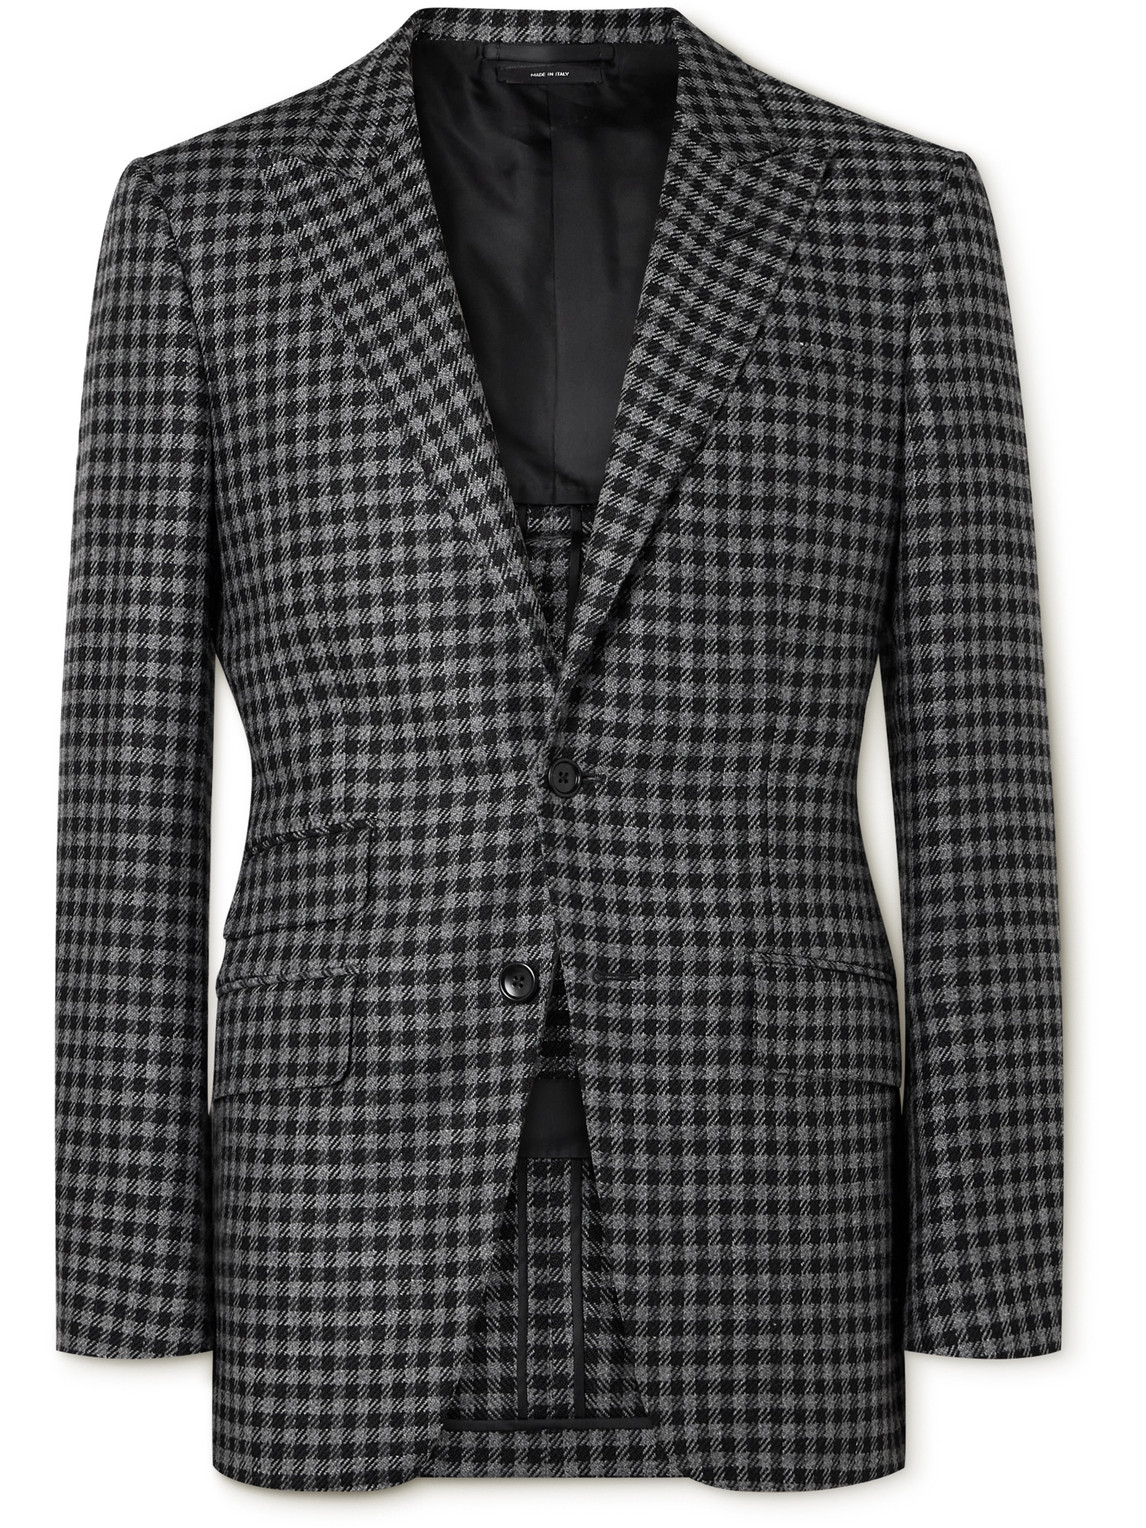 Tom Ford O'connor Slim-fit Gingham Wool, Mohair And Cashmere-blend Suit Jacket In Black